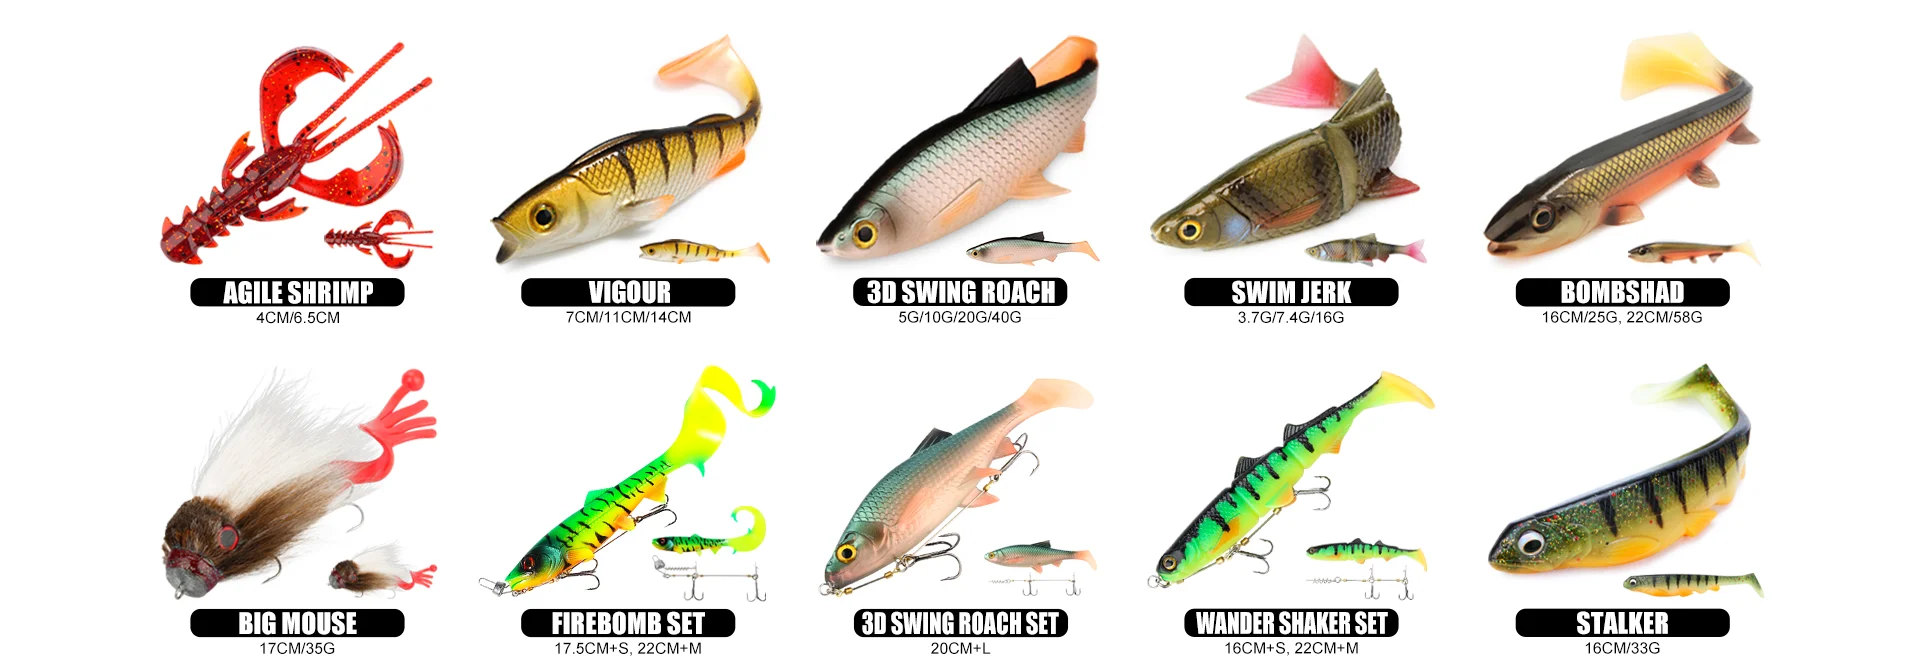 Spinpoler Fishing Factory Store - Amazing products with exclusive discounts  on AliExpress